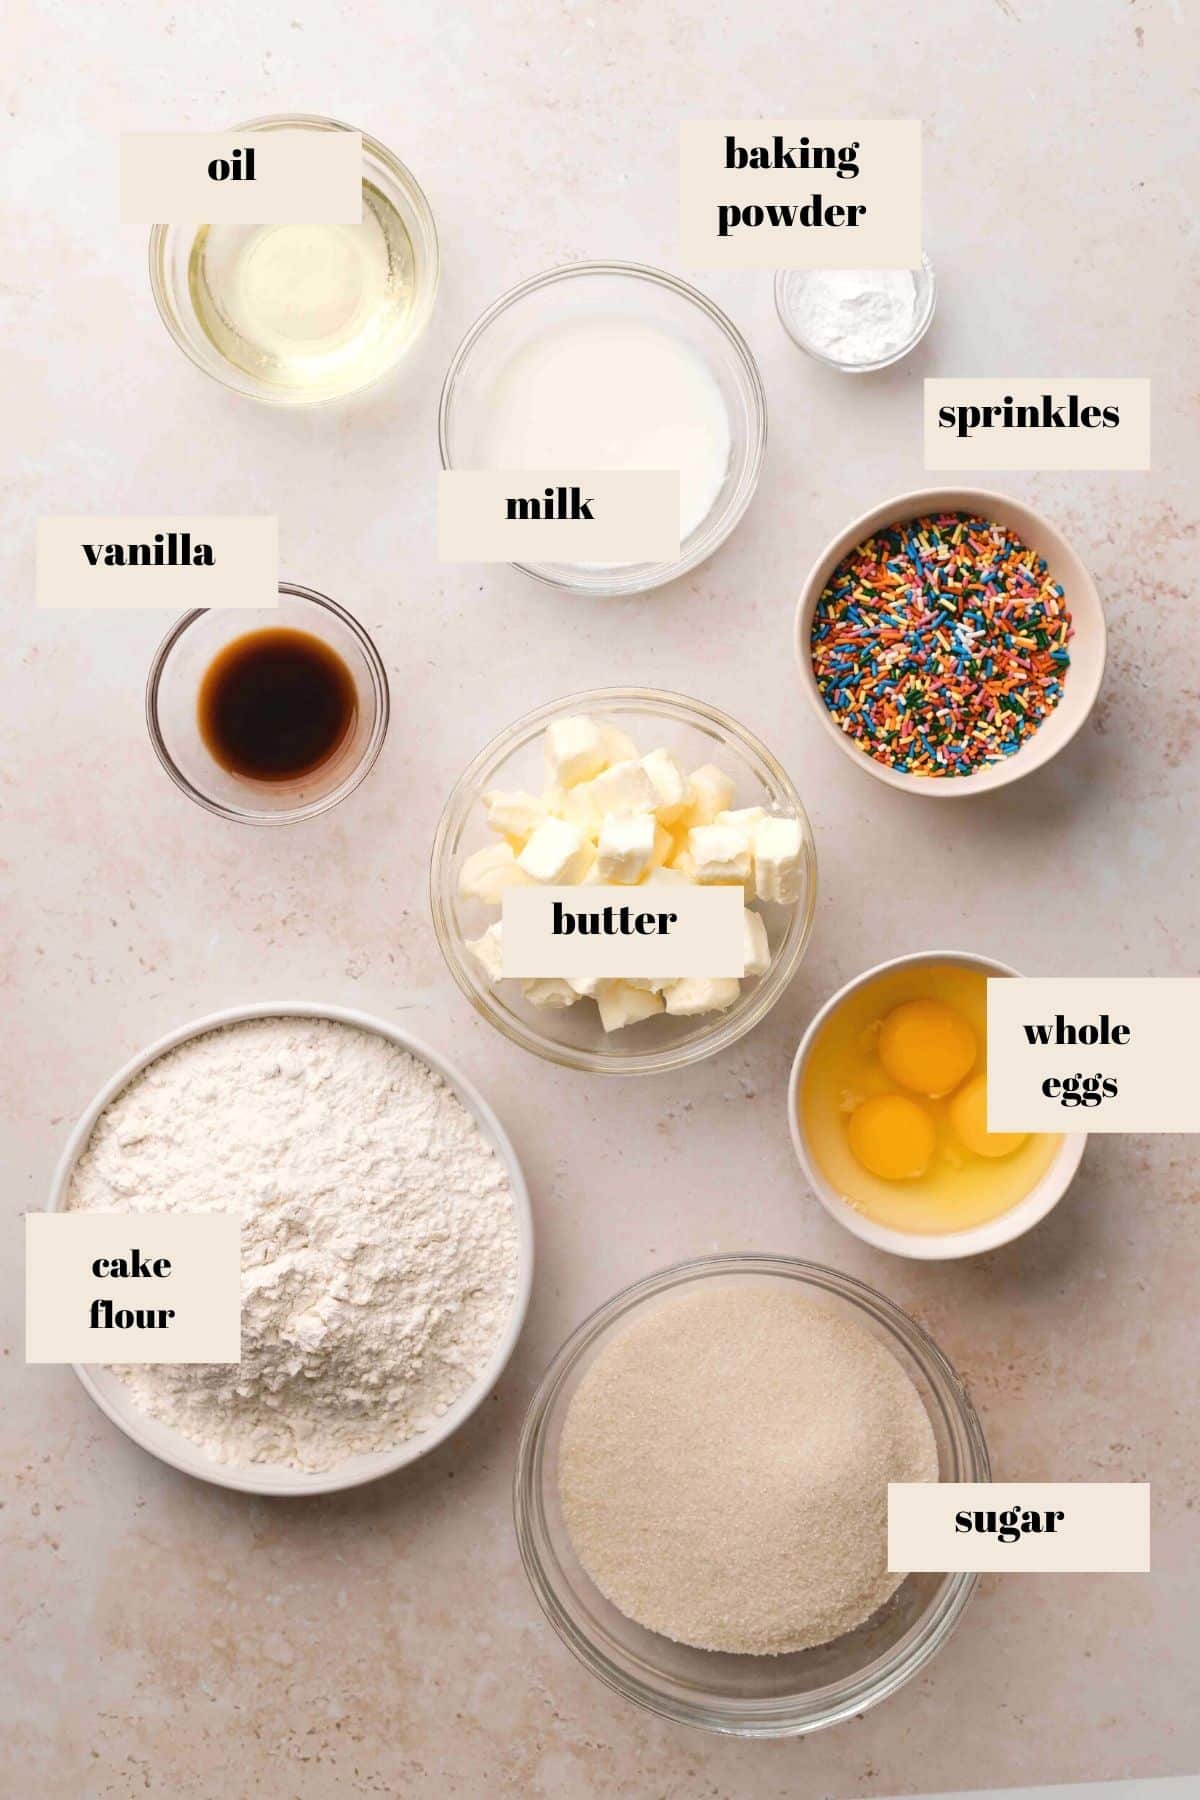 the ingredients needed to make the 8 inch cake recipe.